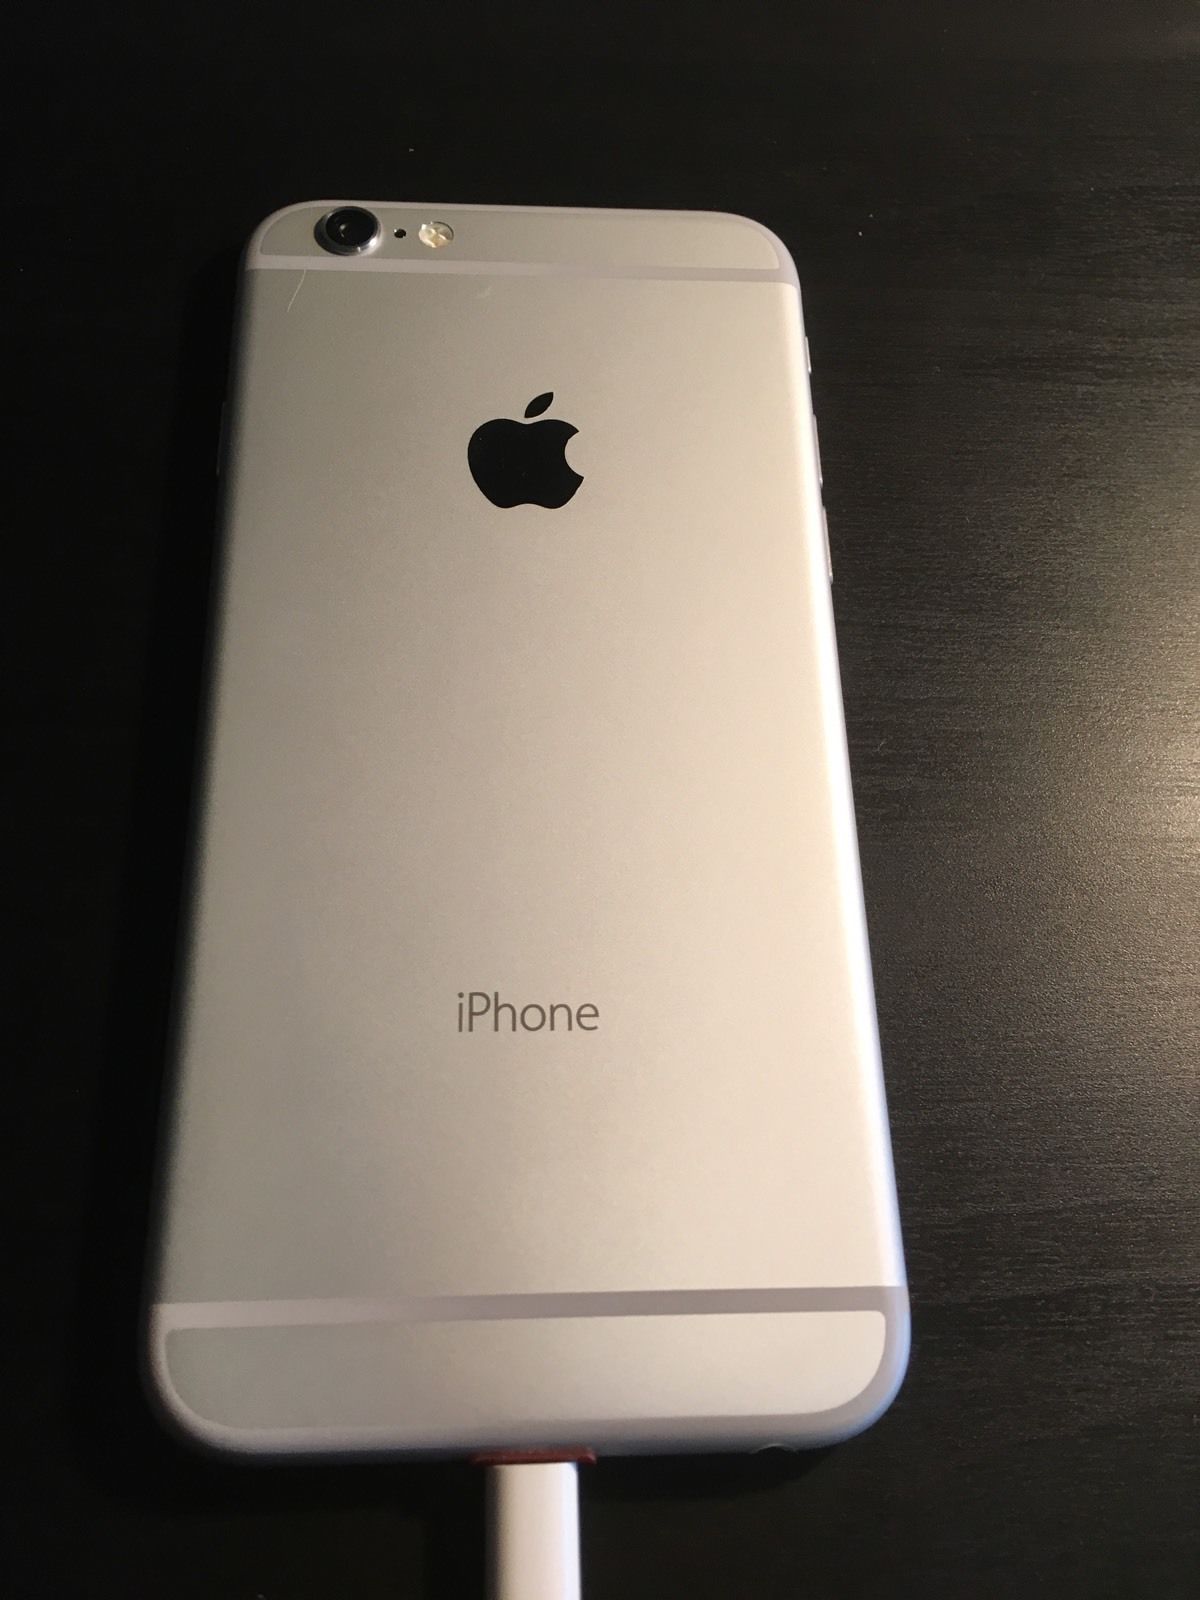 Prototype iPhone 6 Running SwitchBoard OS Surfaces For Sale on eBay